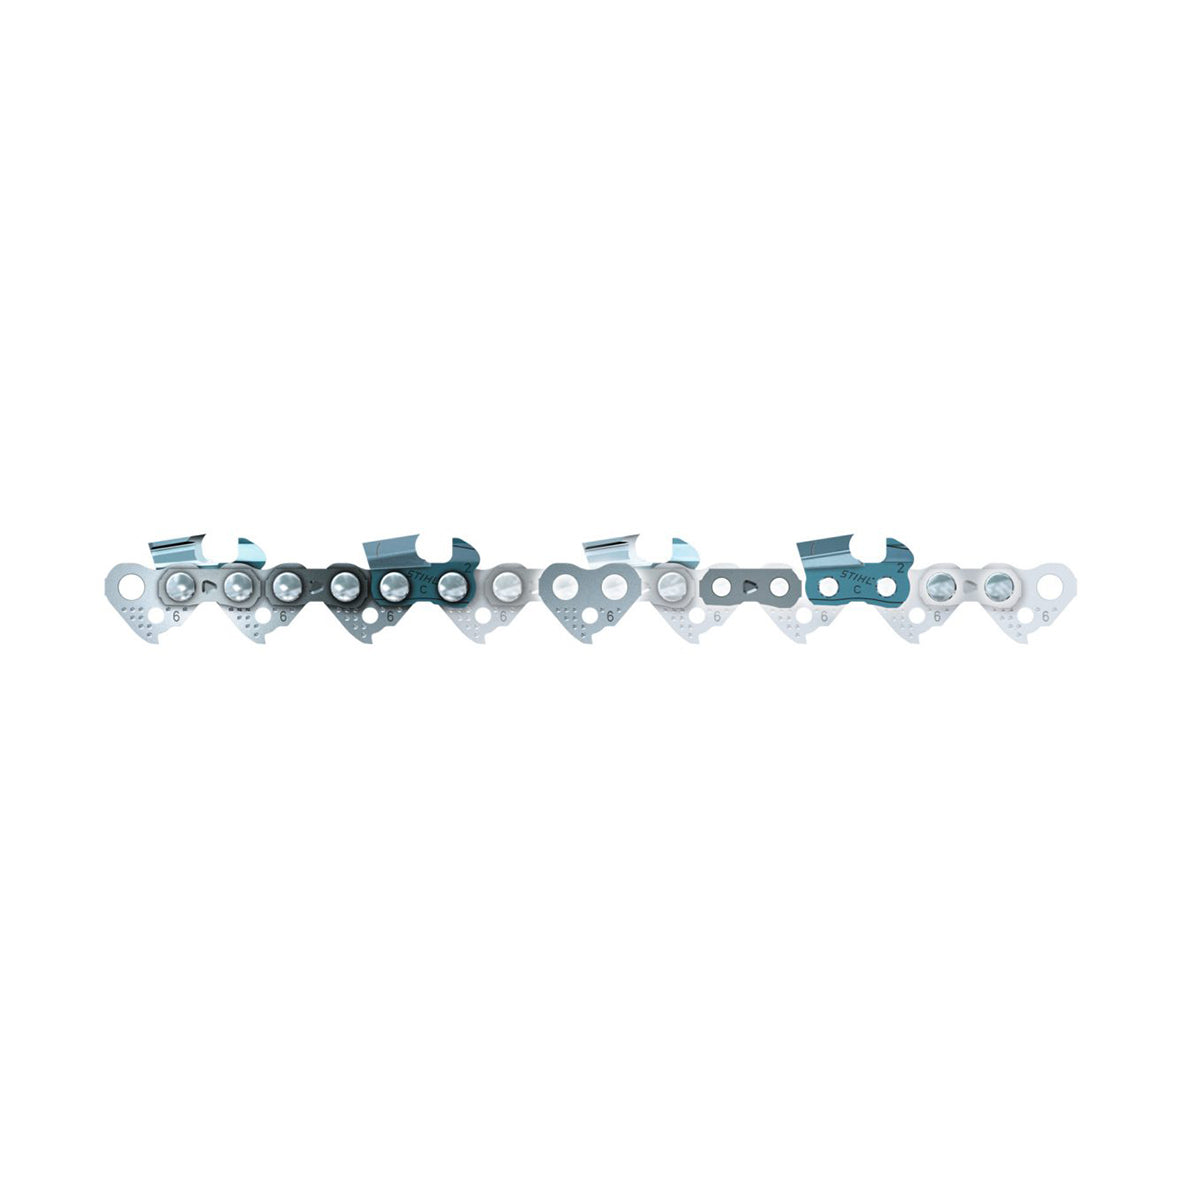 STIHL Rapid Super RS Chain for 3/8" 1.6mm